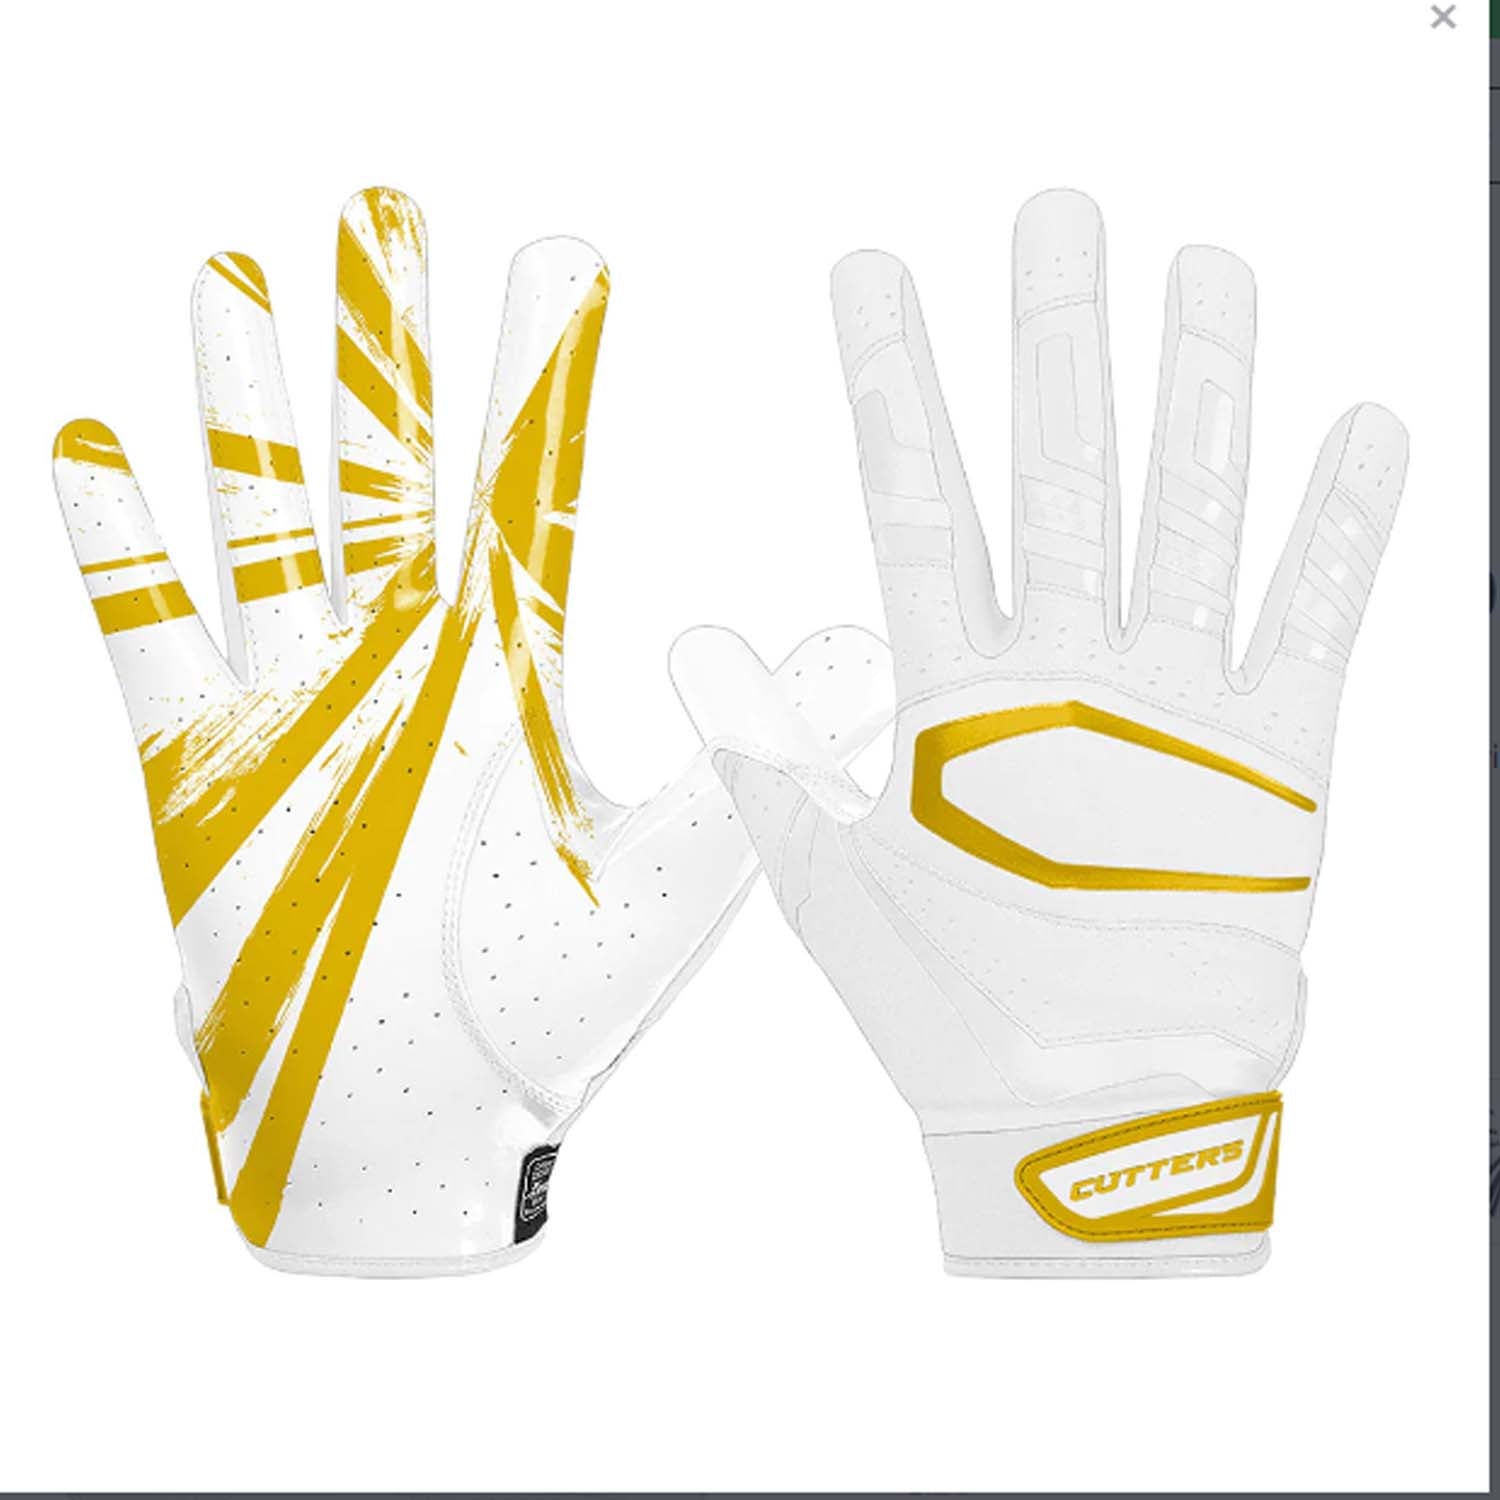 BURST REV PRO 3.0 RECEIVER GLOVES YELLOW LARGE ONLY